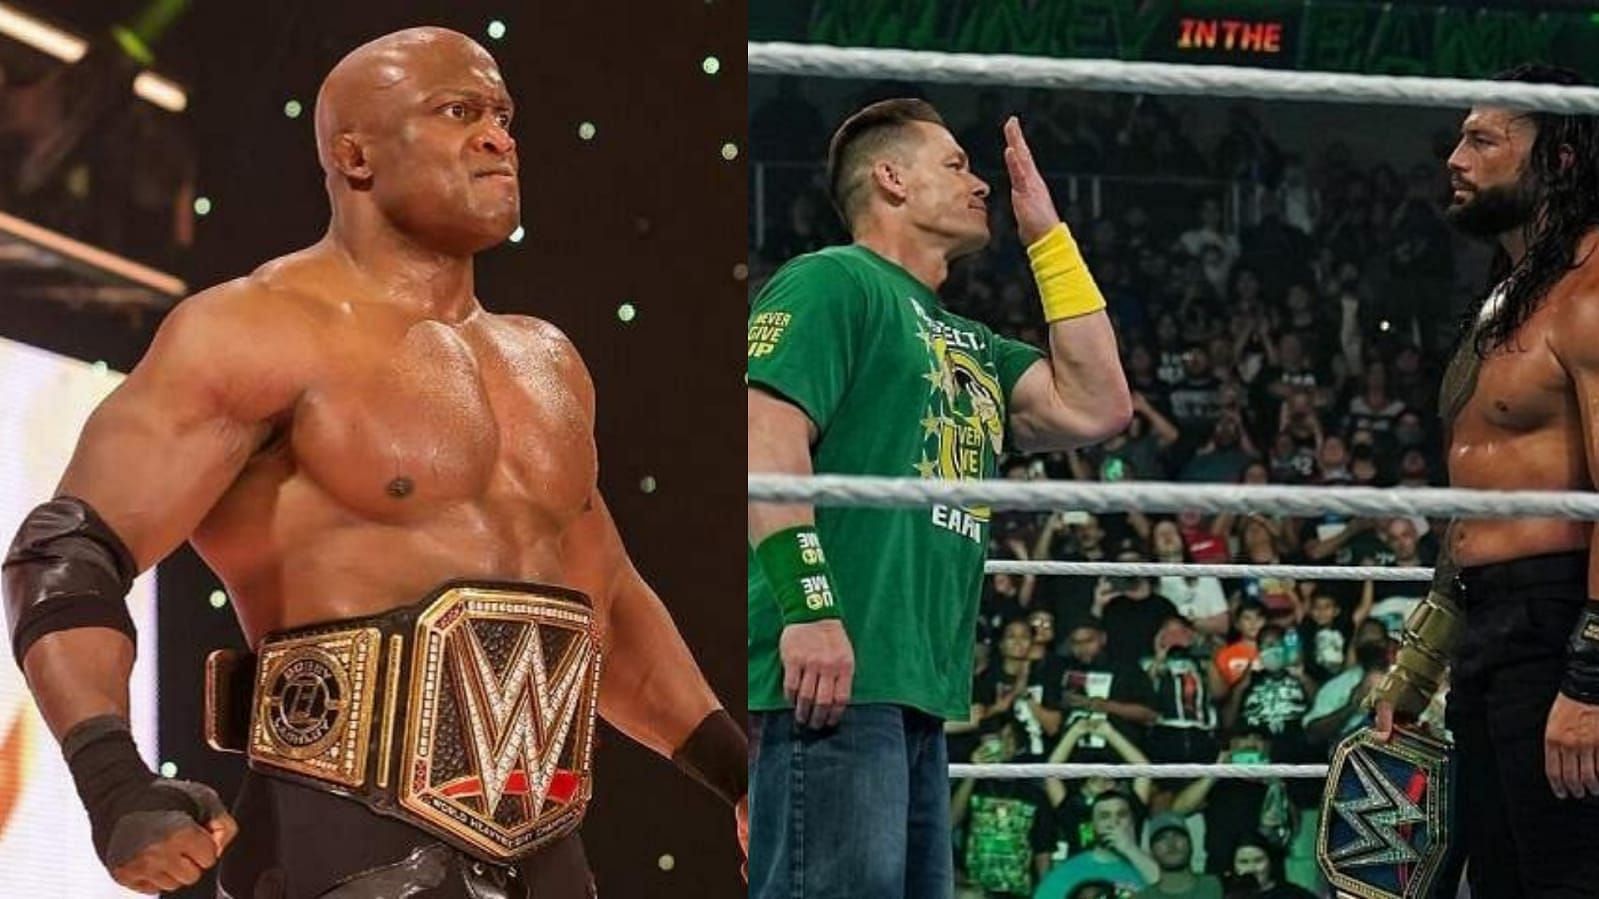 Bobby Lashley has claimed that his former foe will soon reach the level of John Cena and Roman Reigns